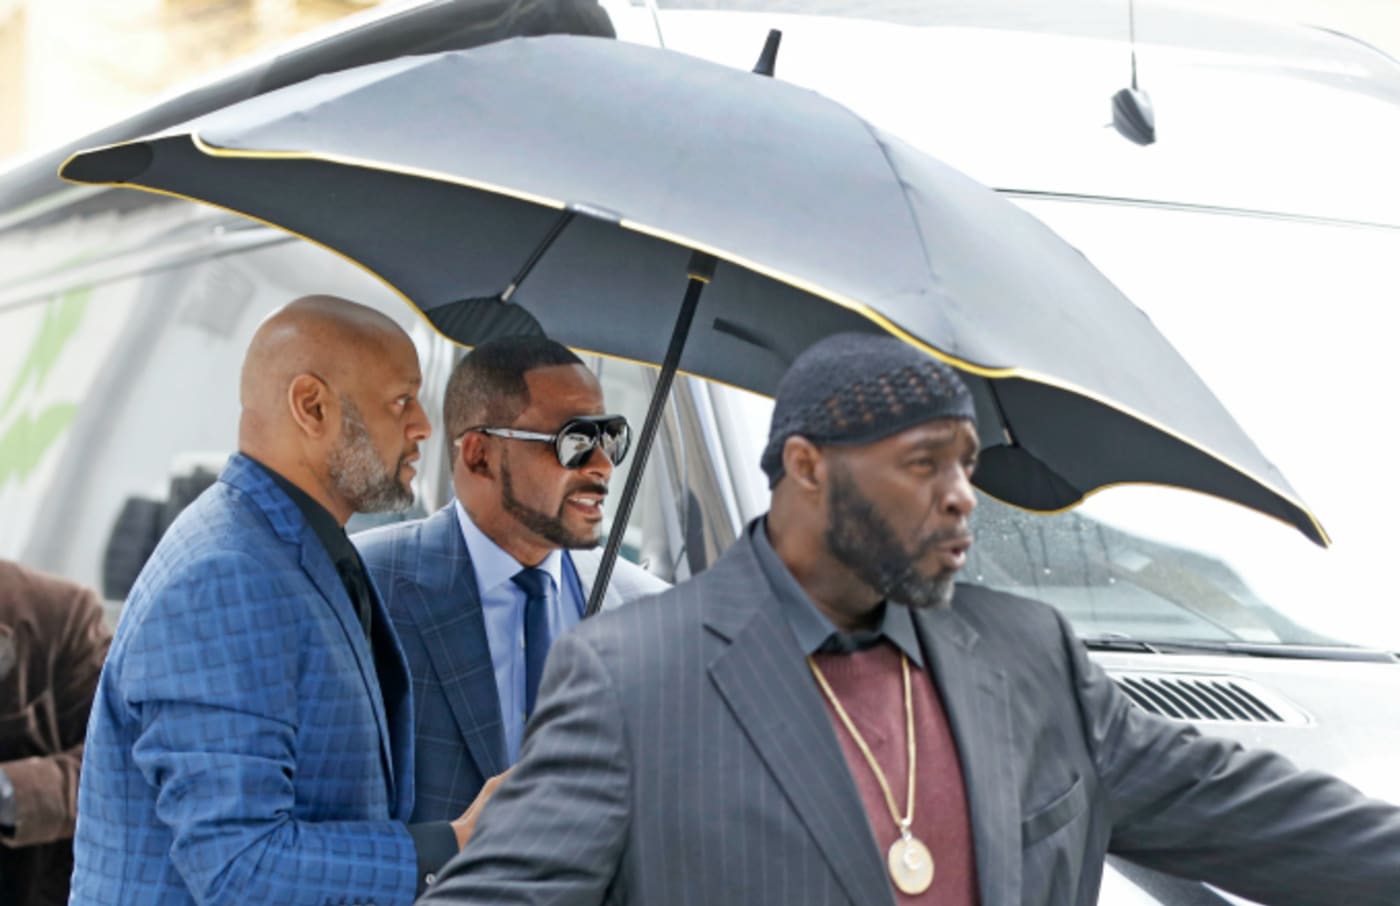 Singer R. Kelly arrives at the Daley Center for his hearing on child support